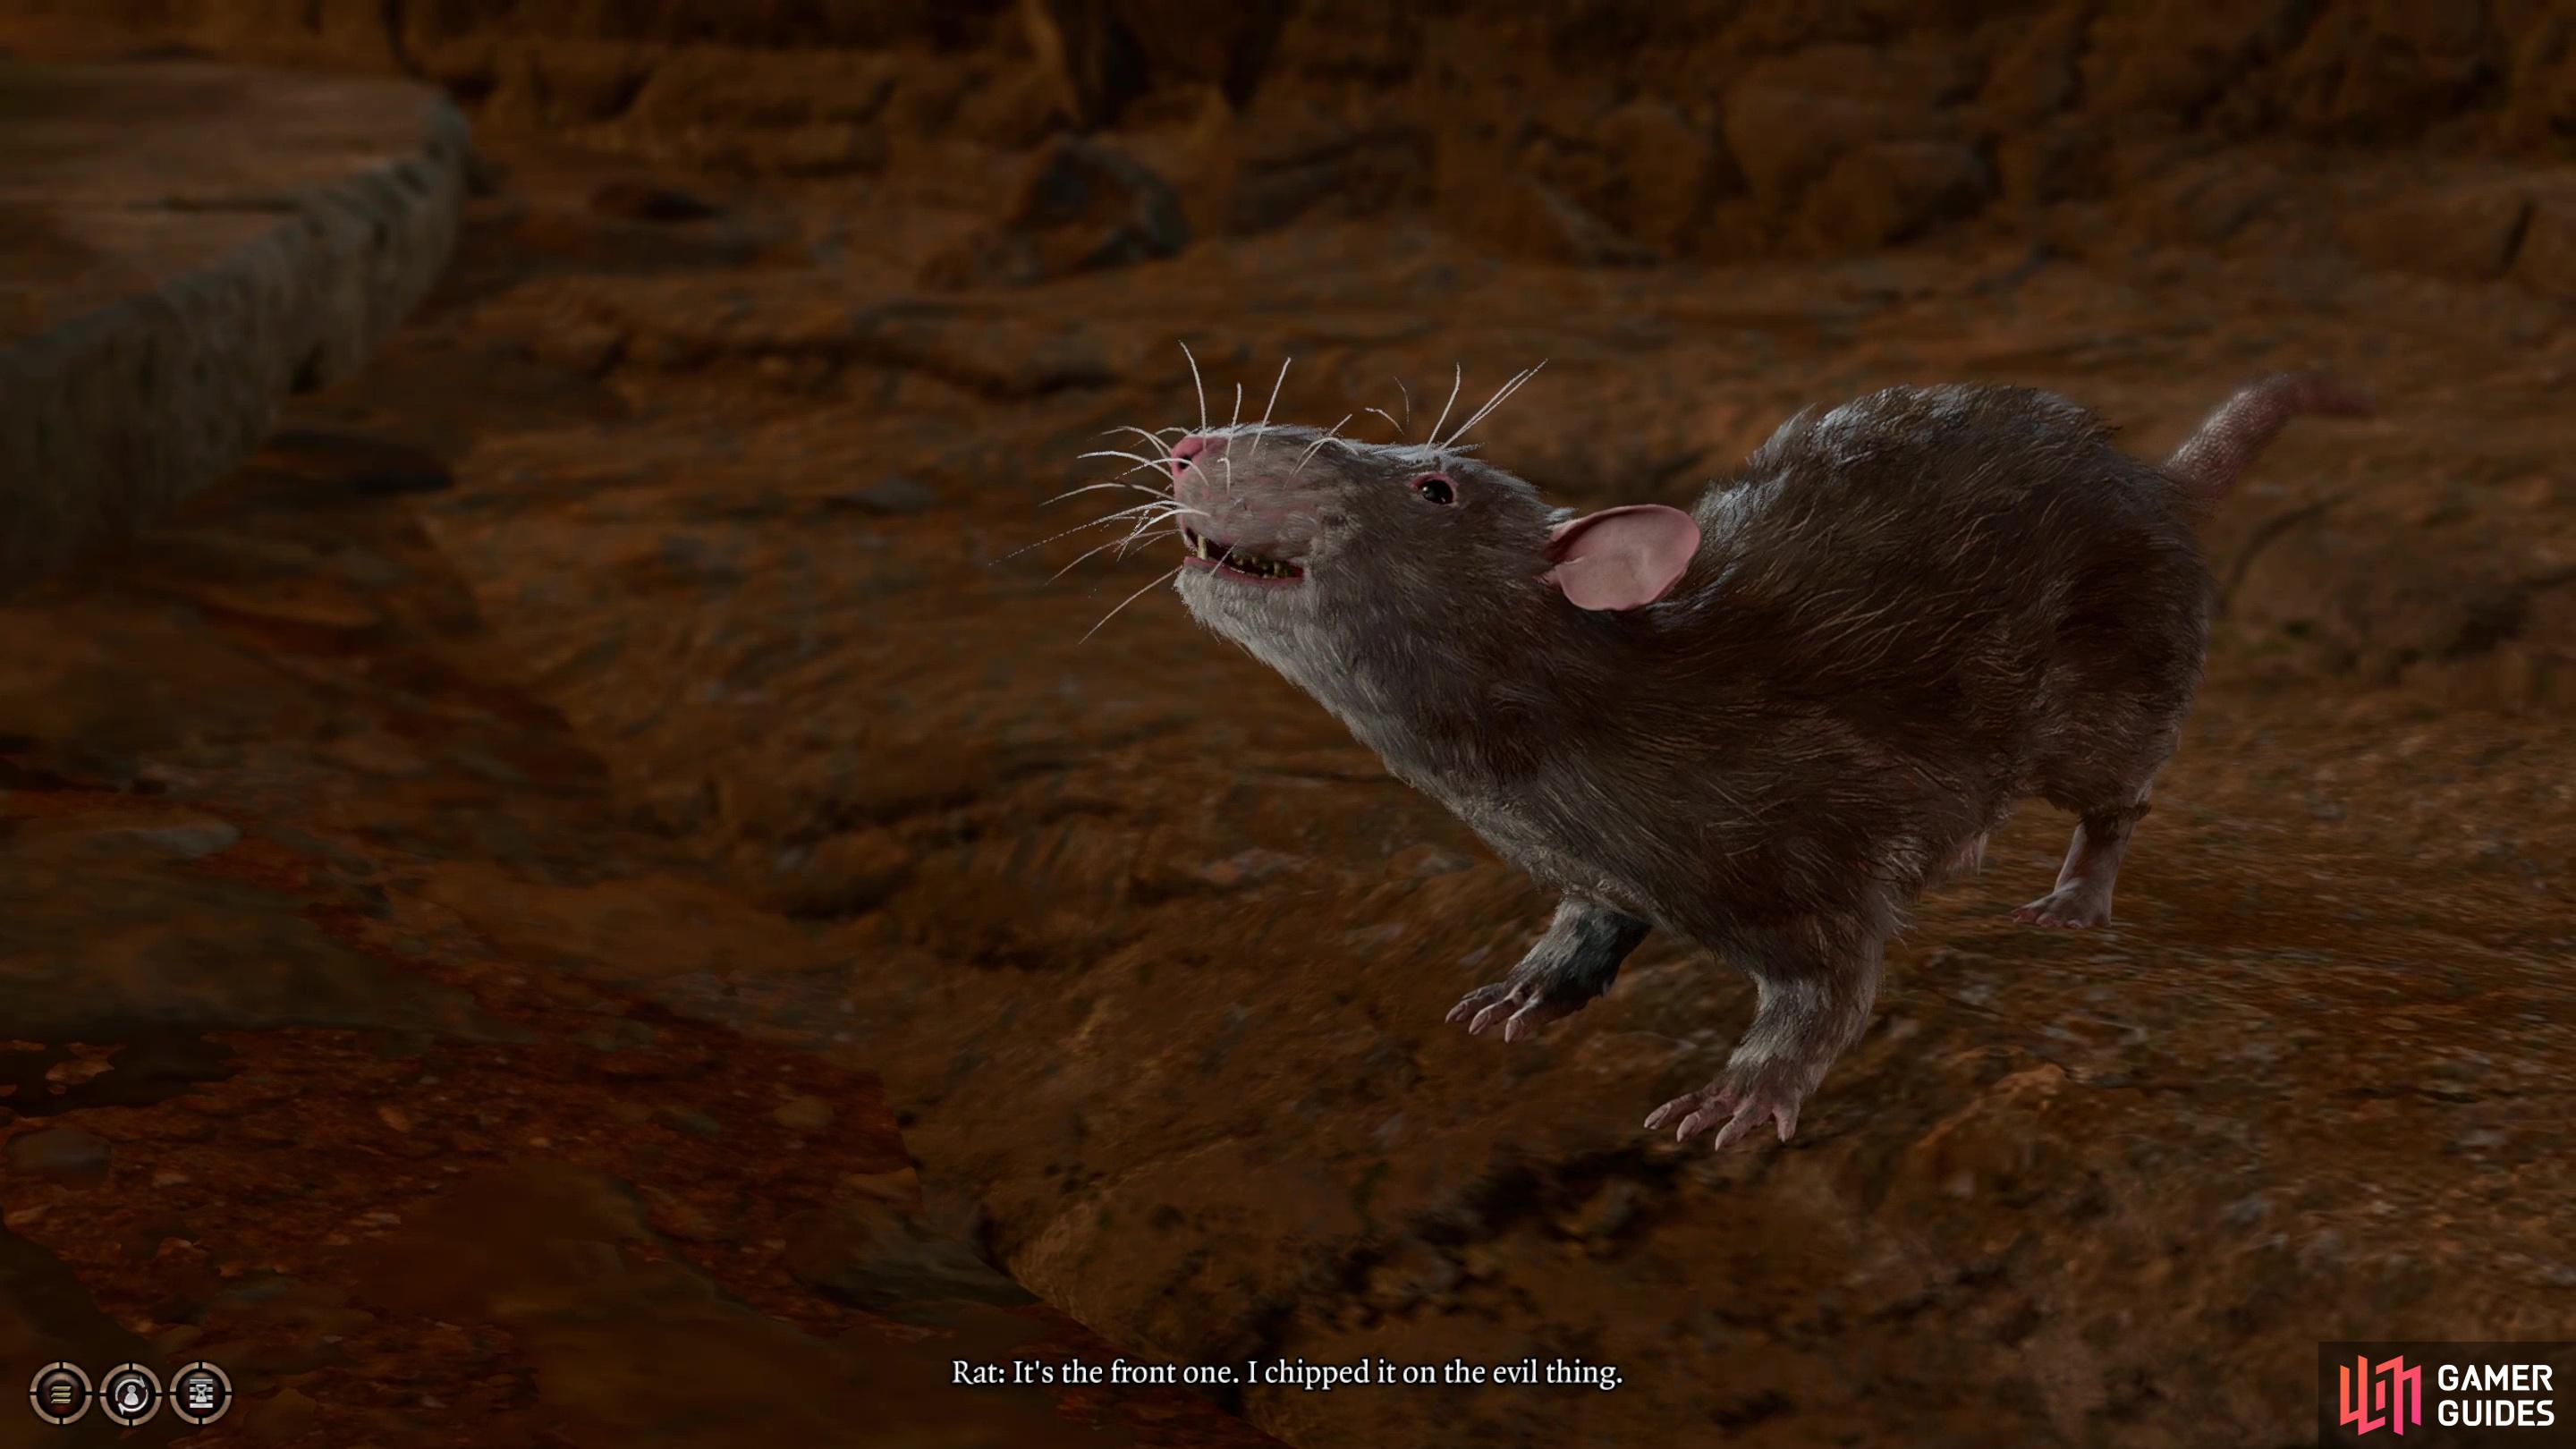 Speak with Animals does what it says, and animals in Baldur’s Gate 3 are surprisingly chatty, capable of divulging all sorts of interesting information.